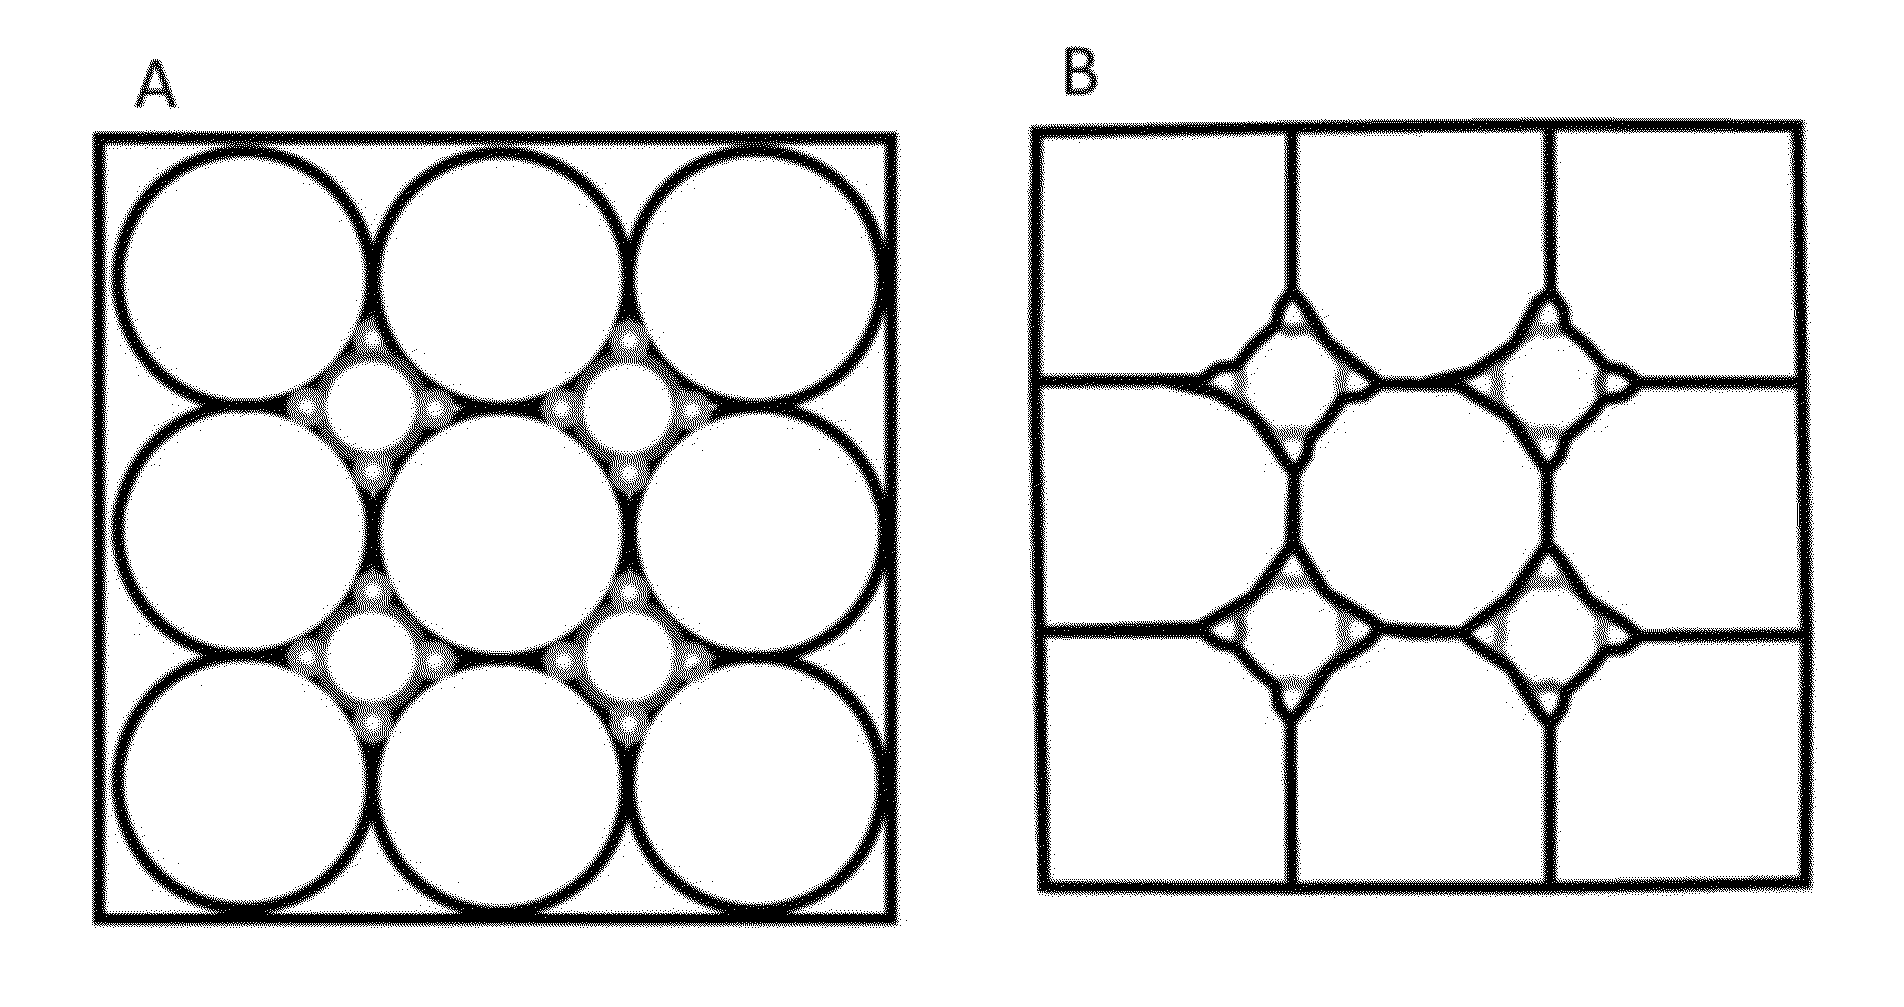 Foams Made of Amorphous Hollow Spheres and Methods of Manufacture Thereof